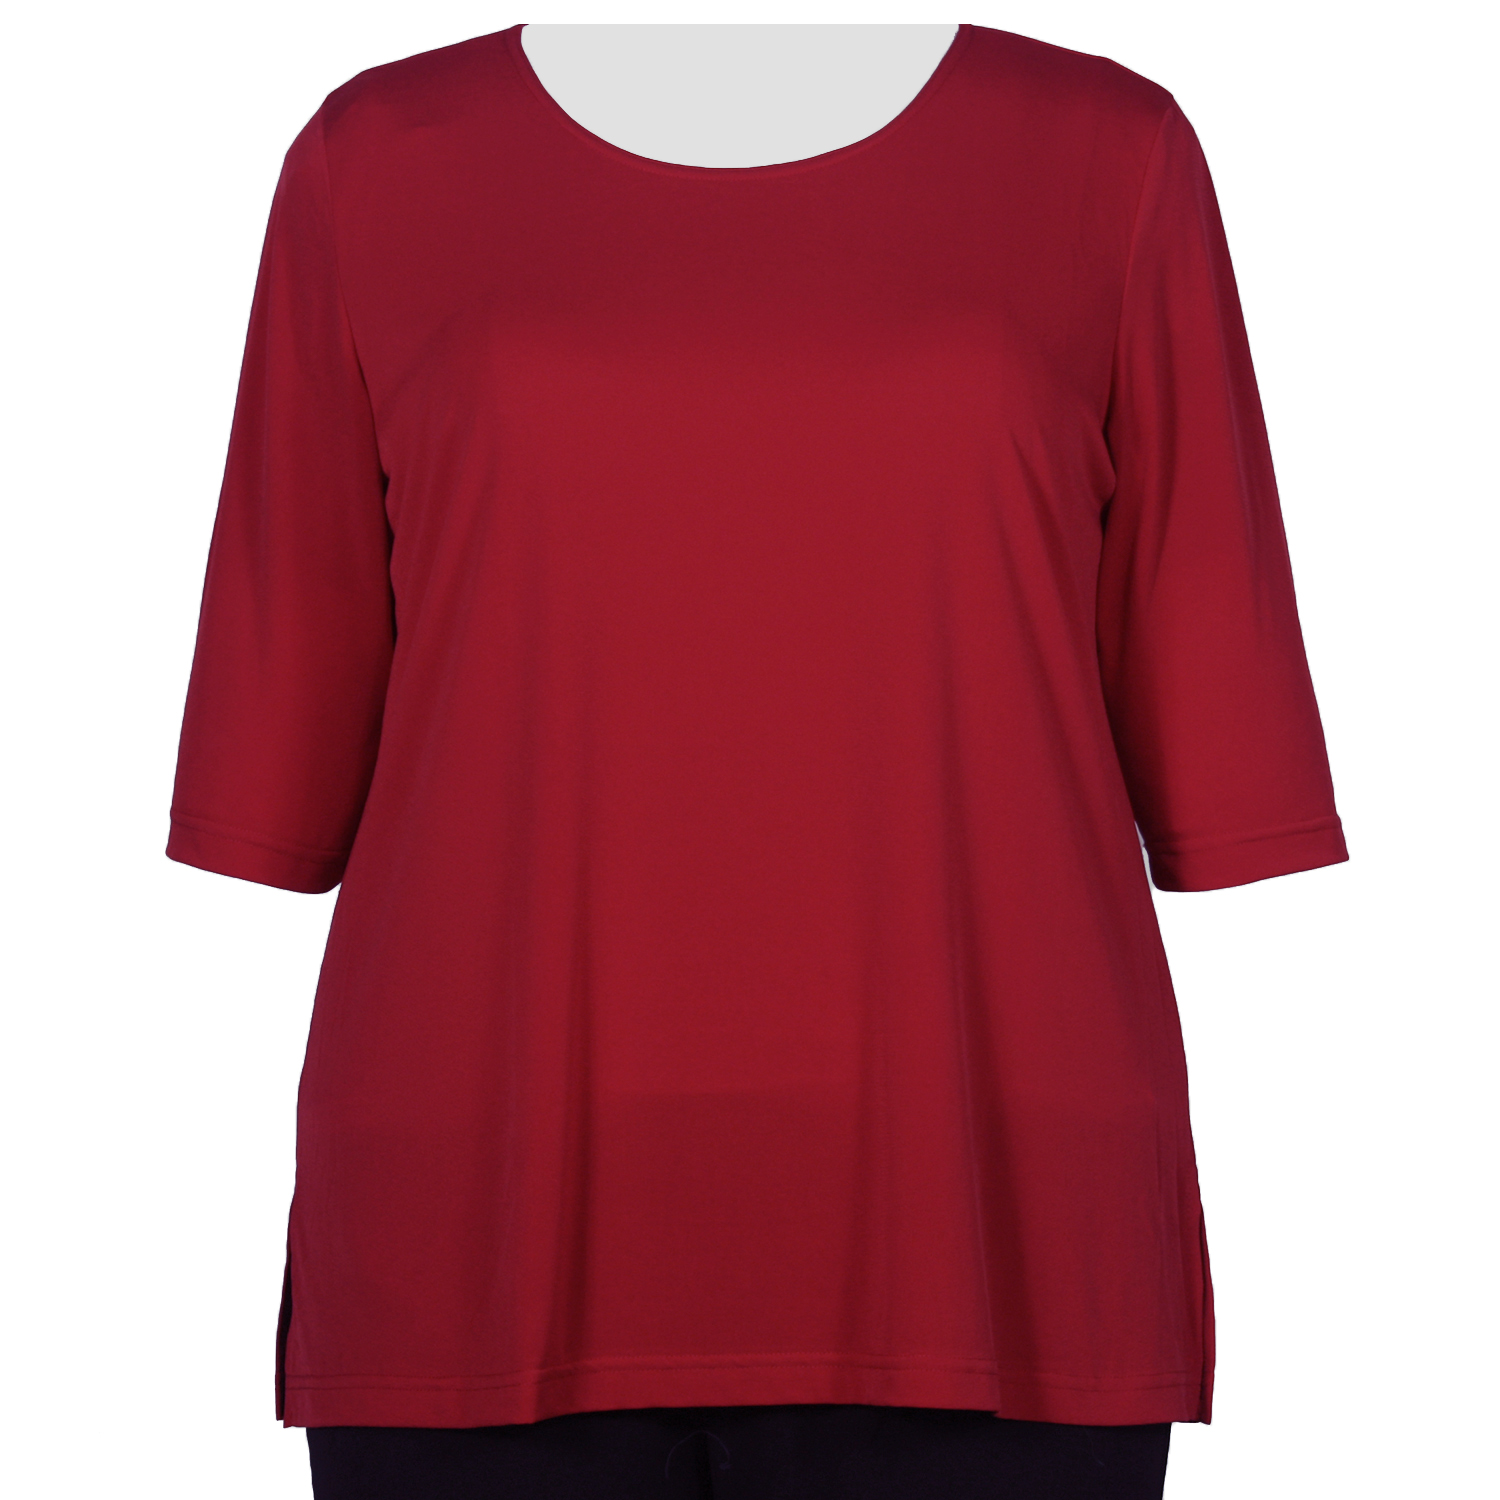 A Personal Touch Red 3/4 Sleeve Round Neck Pullover Top Woman's Plus Size Top